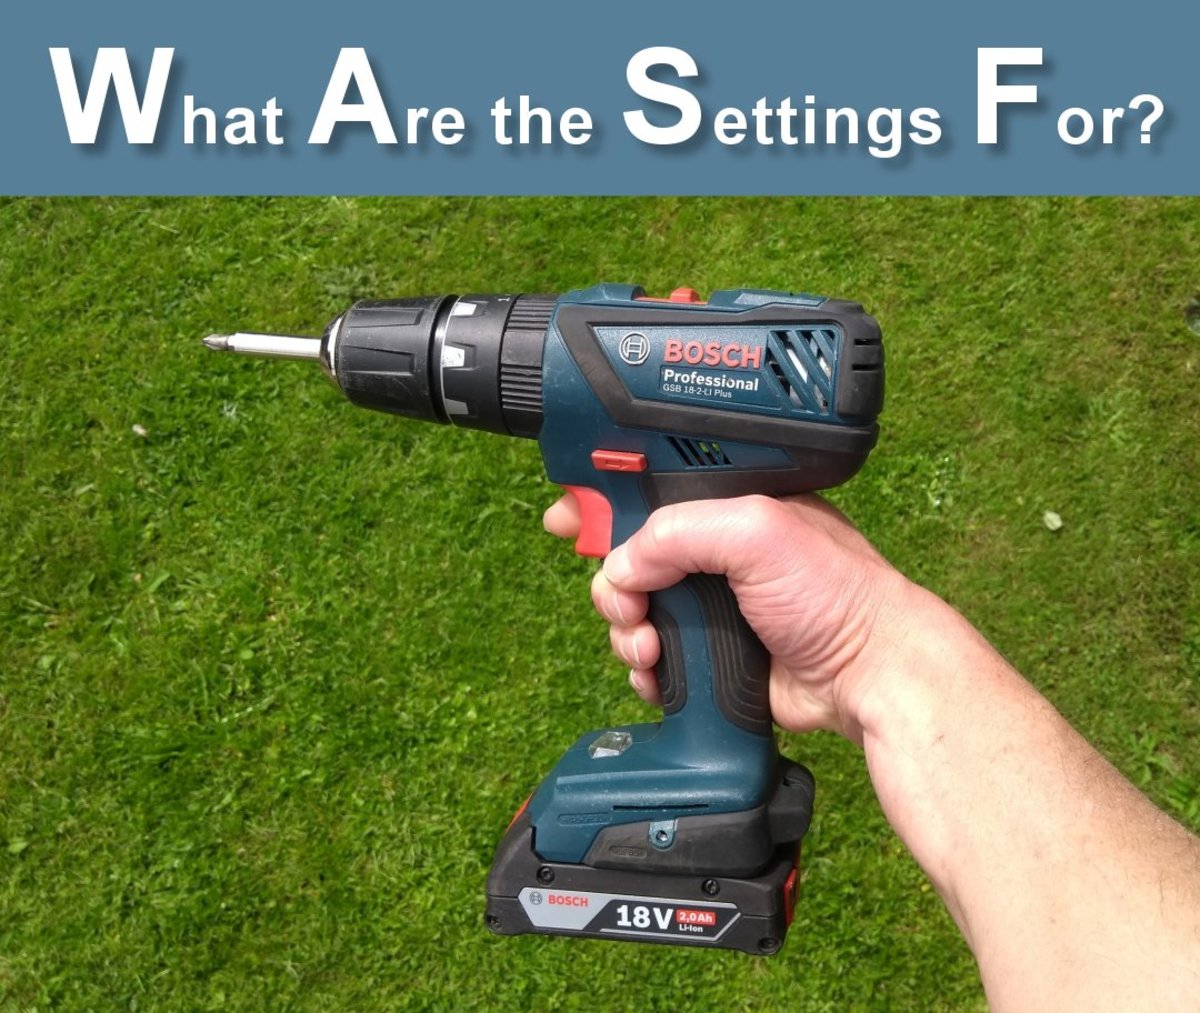 Settings on a cordless drill